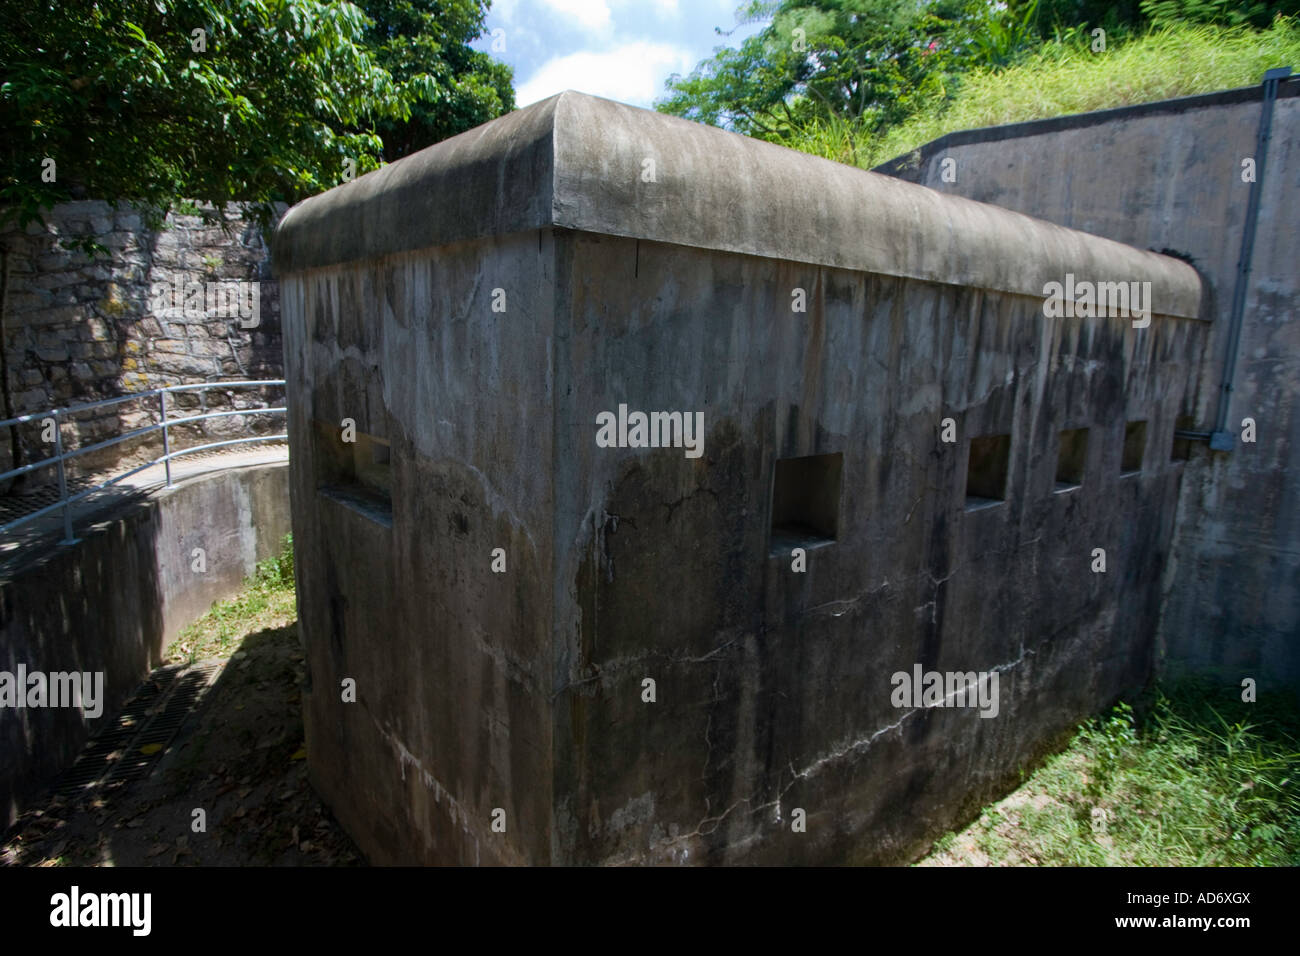 North Caponier Concrete Bunker Museum of Coastal Defence Hong Kong Stock Photo